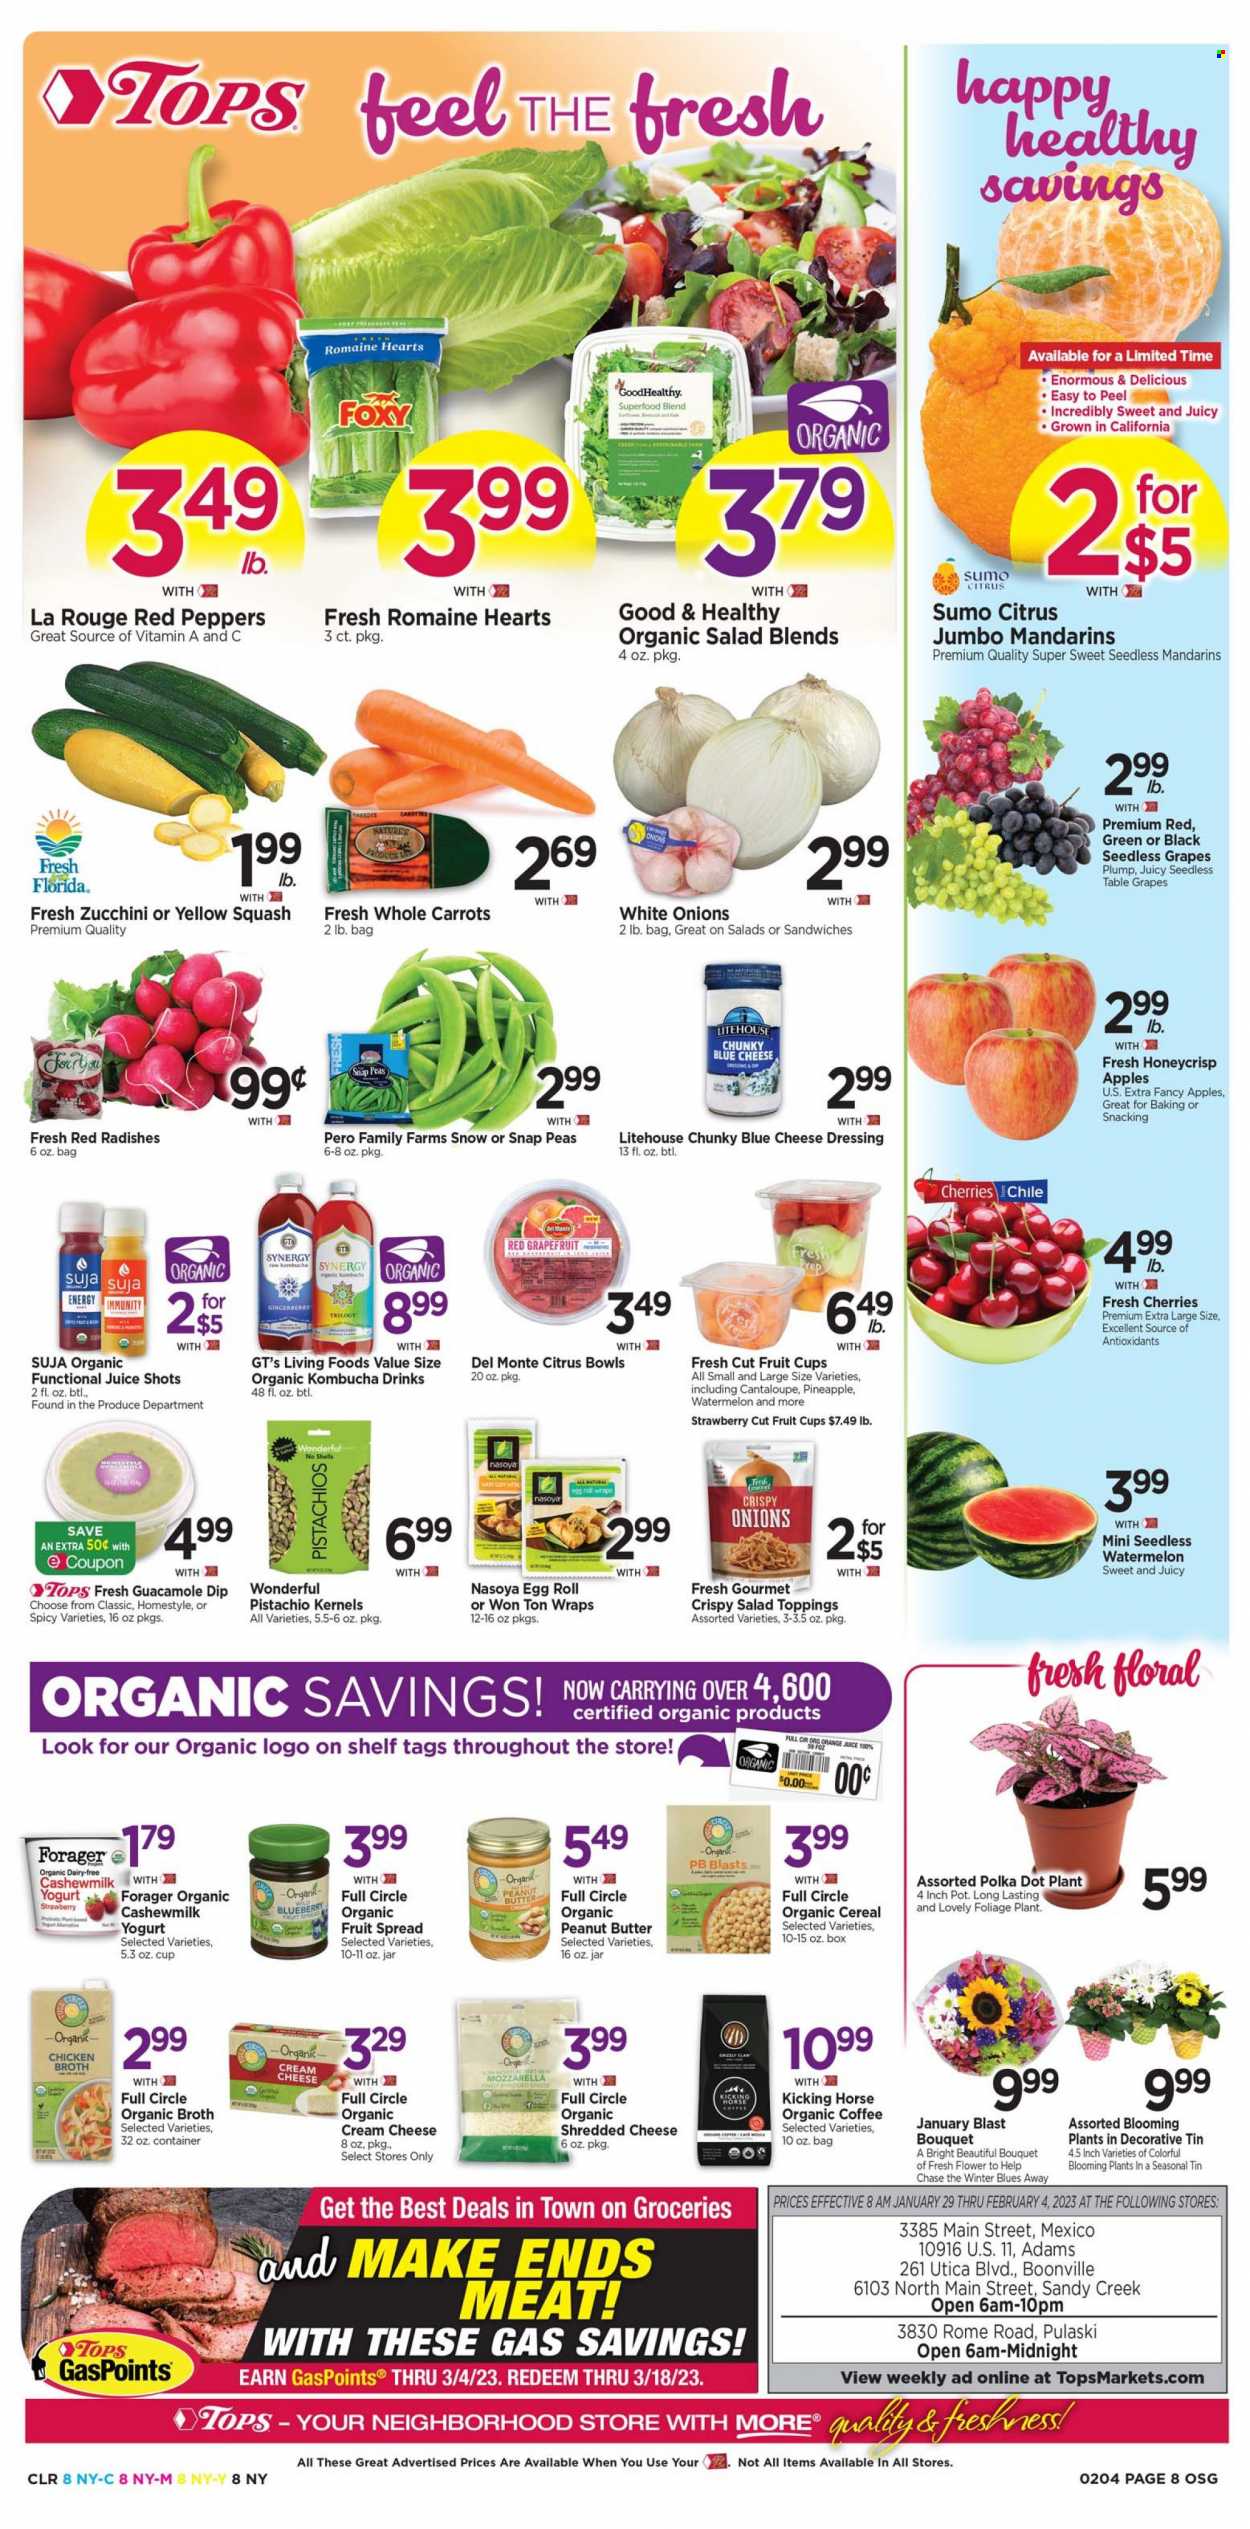 thumbnail - Tops Flyer - 01/29/2023 - 02/04/2023 - Sales products - wraps, carrots, radishes, zucchini, peas, onion, peppers, yellow squash, red peppers, apples, grapefruits, grapes, mandarines, seedless grapes, watermelon, pineapple, cherries, fruit cup, sandwich, egg rolls, guacamole, cream cheese, mozzarella, shredded cheese, yoghurt, eggs, dip, snap peas, chicken broth, broth, Del Monte, cereals, blue cheese dressing, dressing, peanut butter, pistachios, orange juice, juice, kombucha, organic coffee, pot, bouquet, sumo citrus. Page 8.